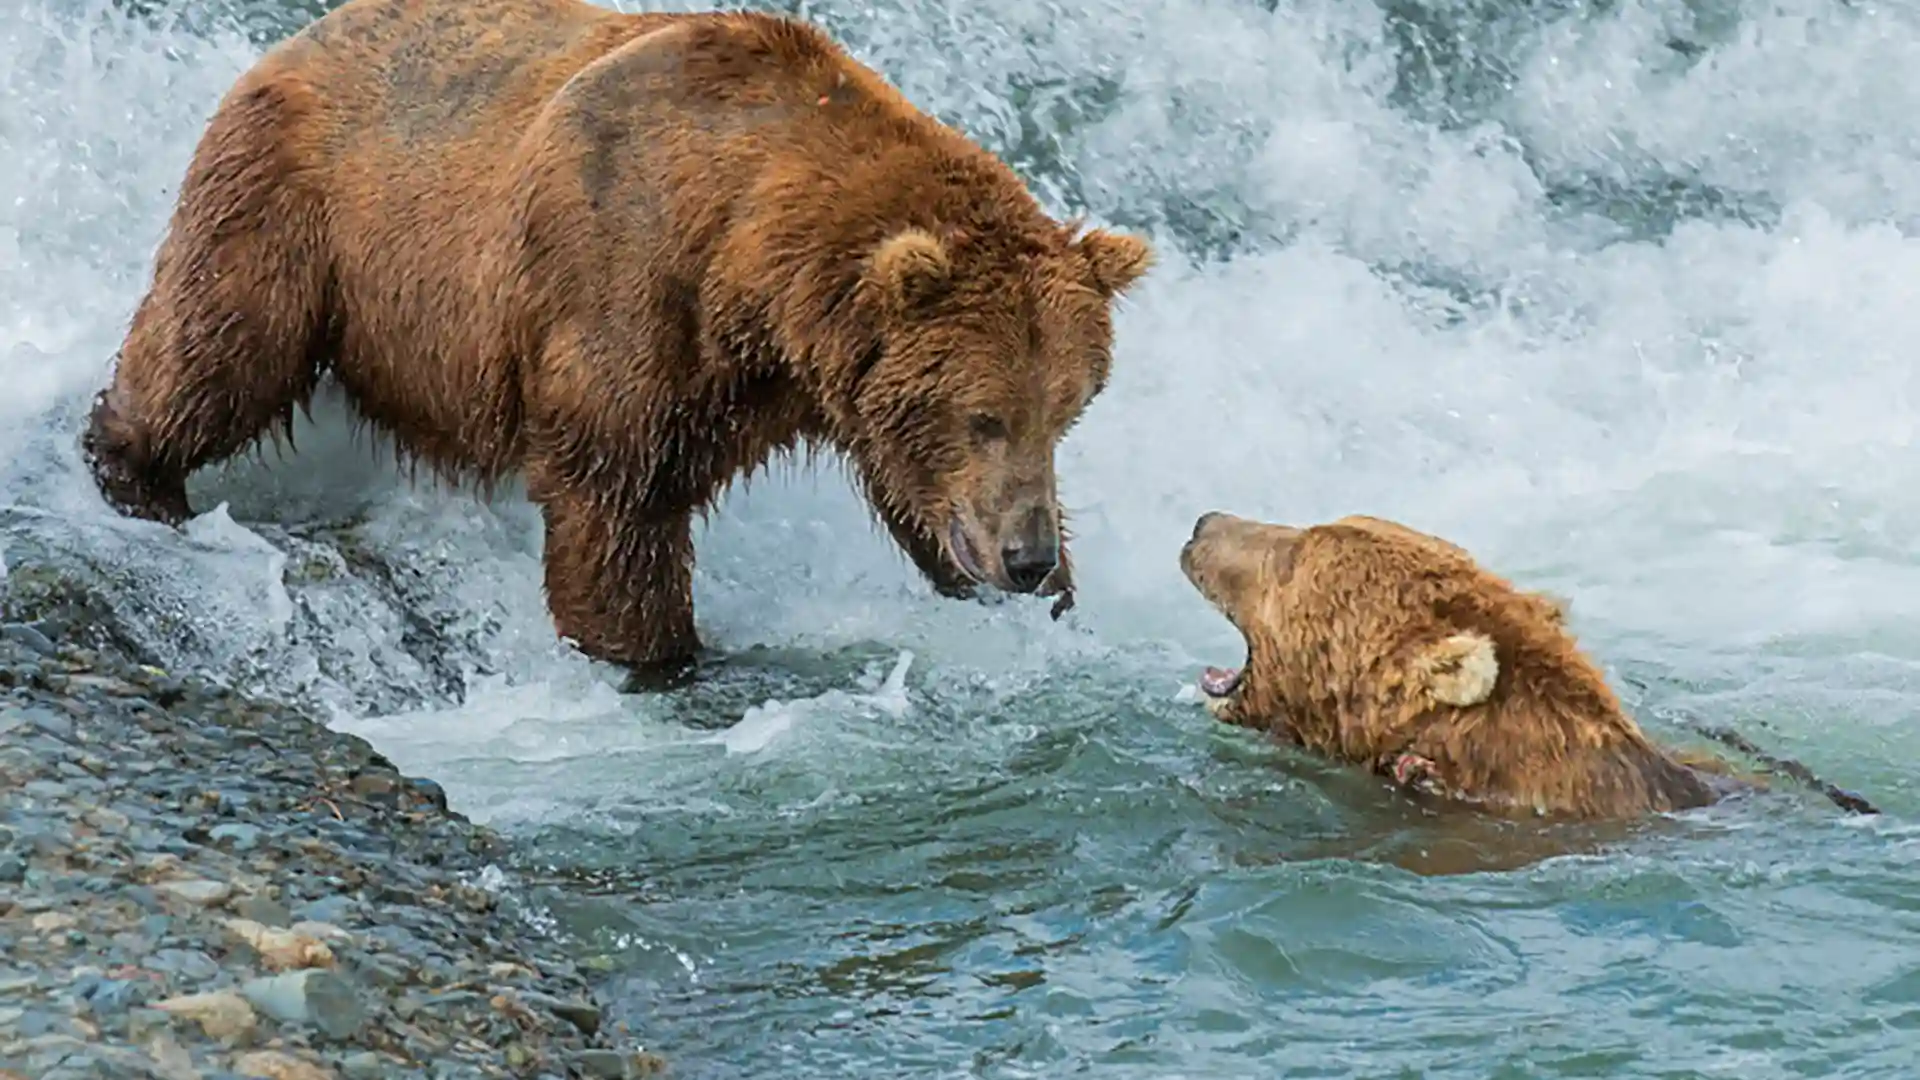 View of bears coming face to face in water in Alaska.